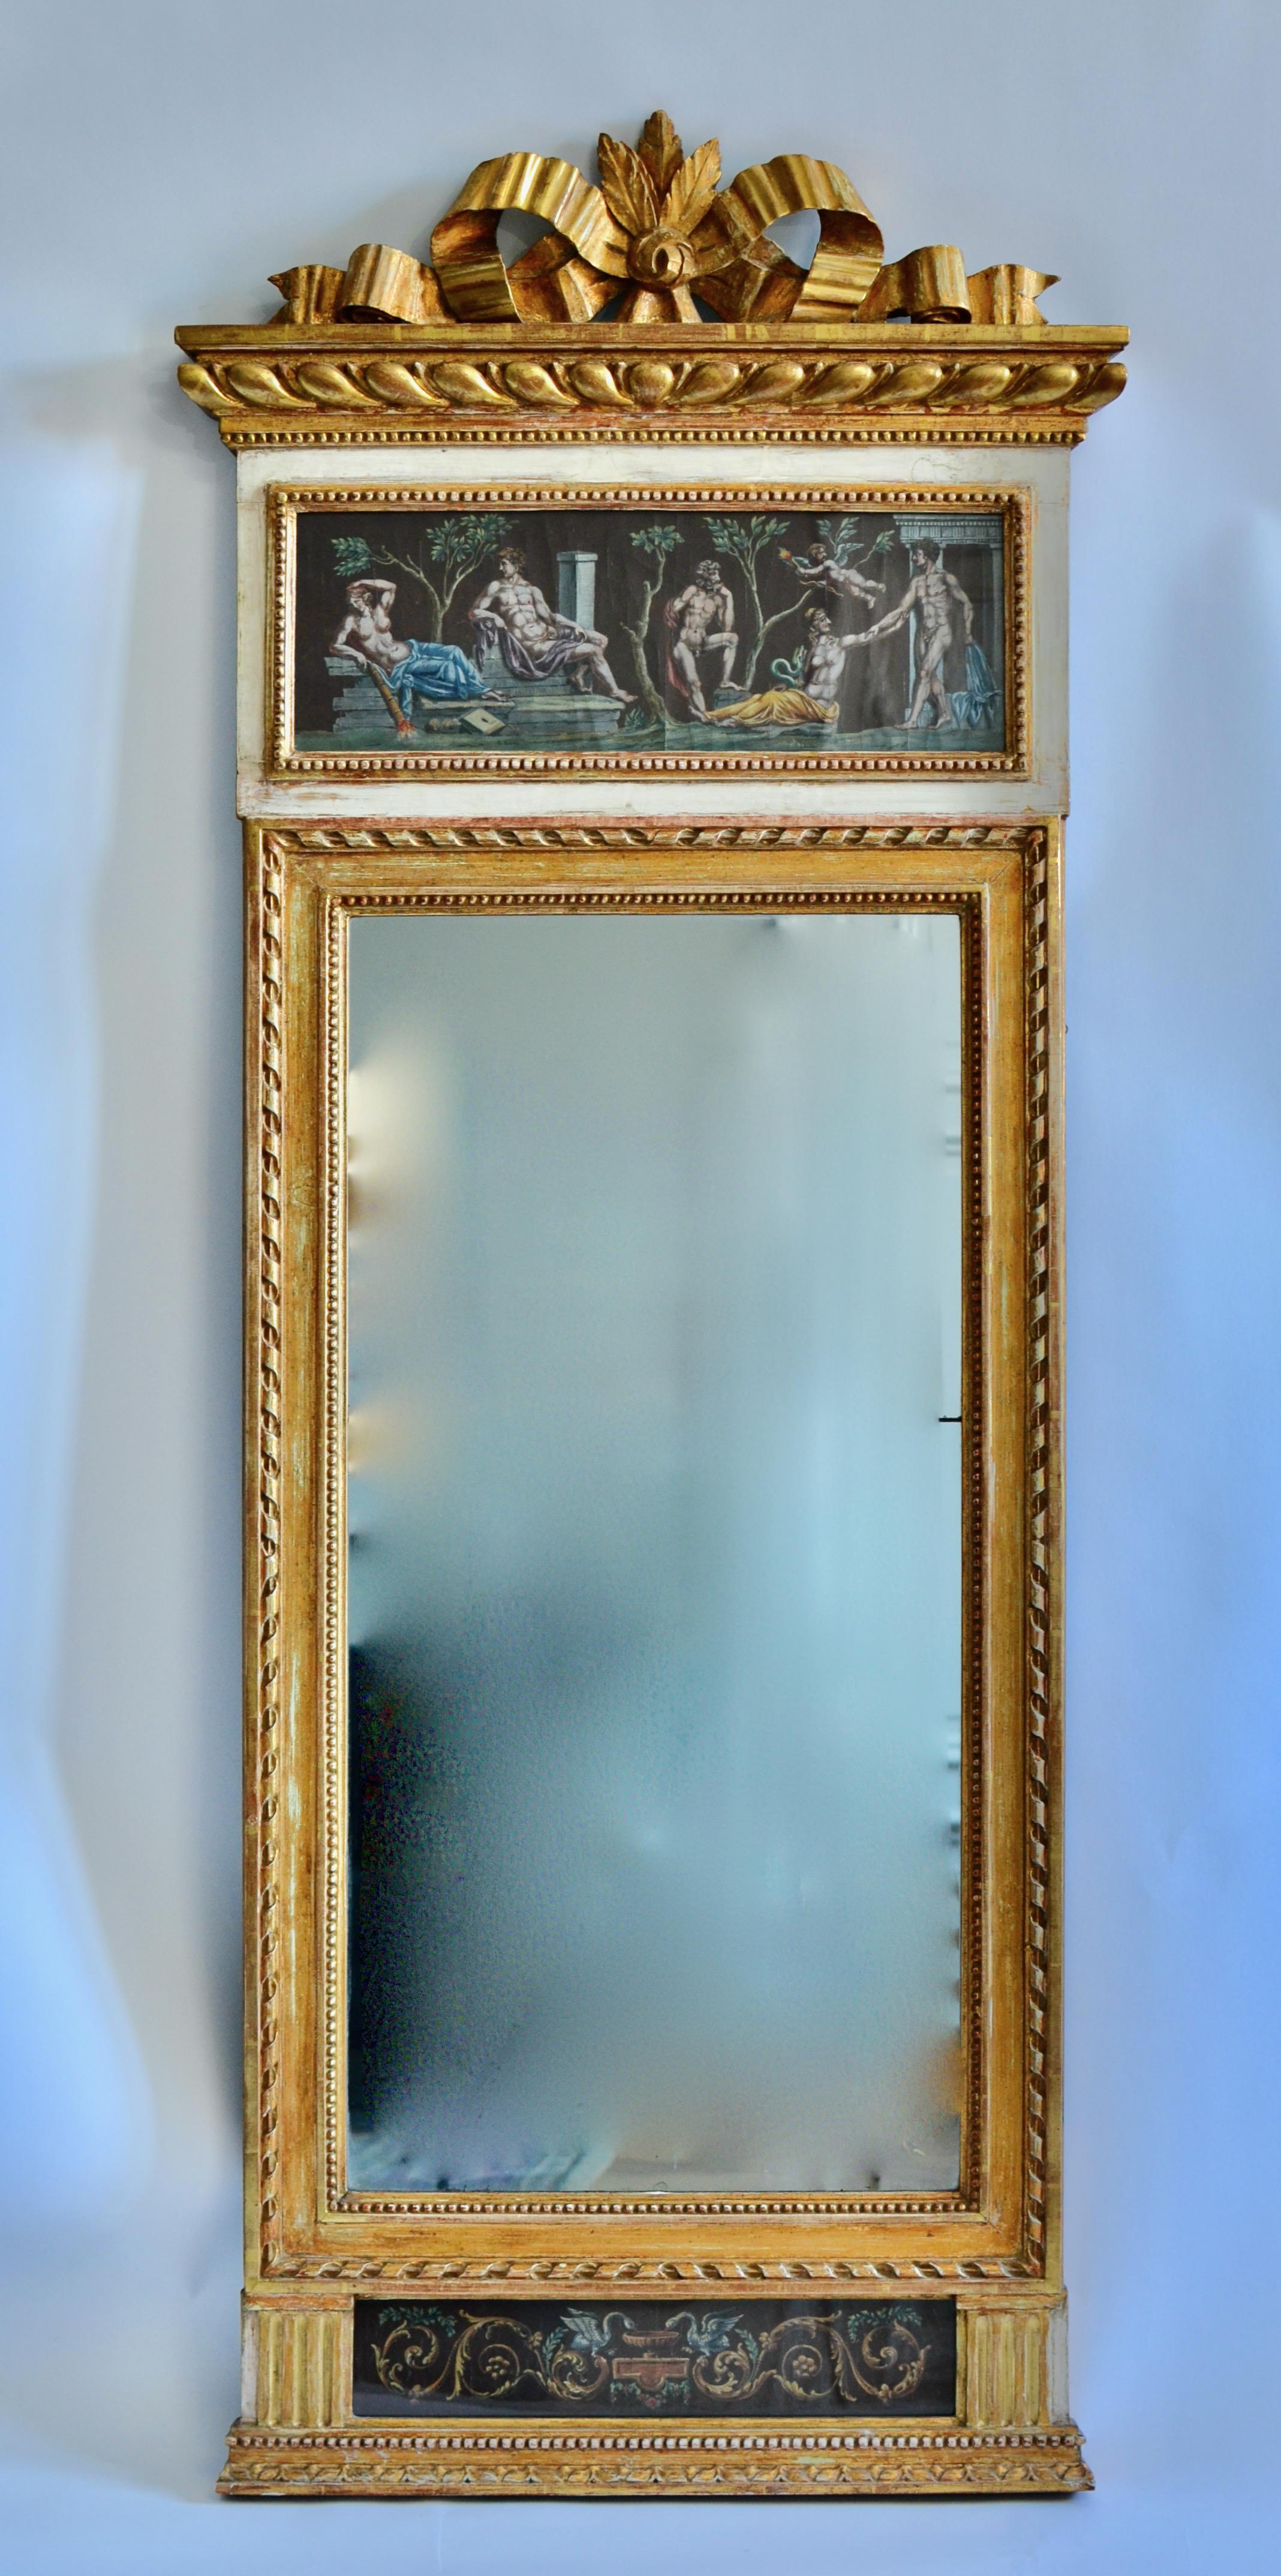 A fine gustavian gilt wood mirror with gouaches made in Stockholm c. 1790. Original gilding. The gouaches painted in the neoclassical pompeian style.